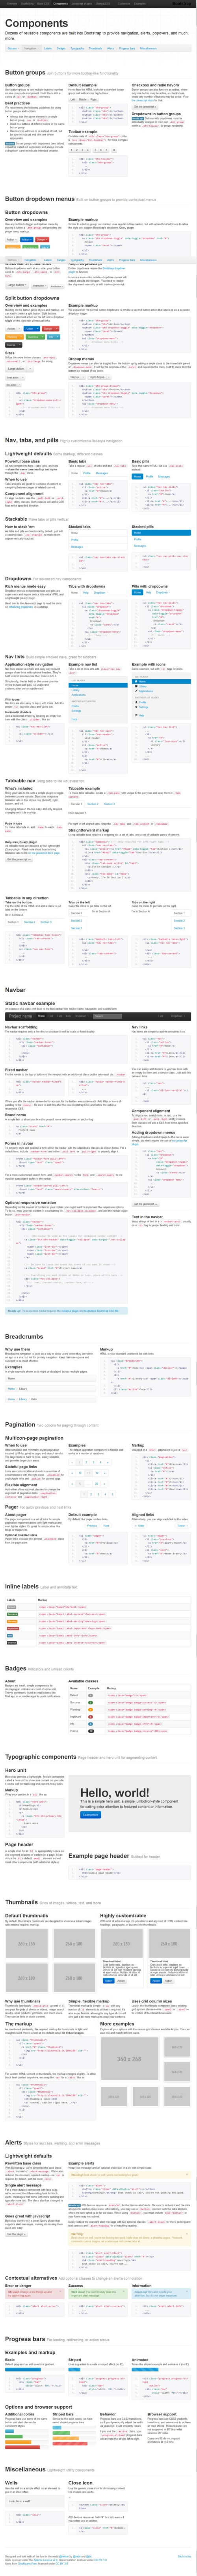 /Images/1.2.Bootstrap.Components.jpg